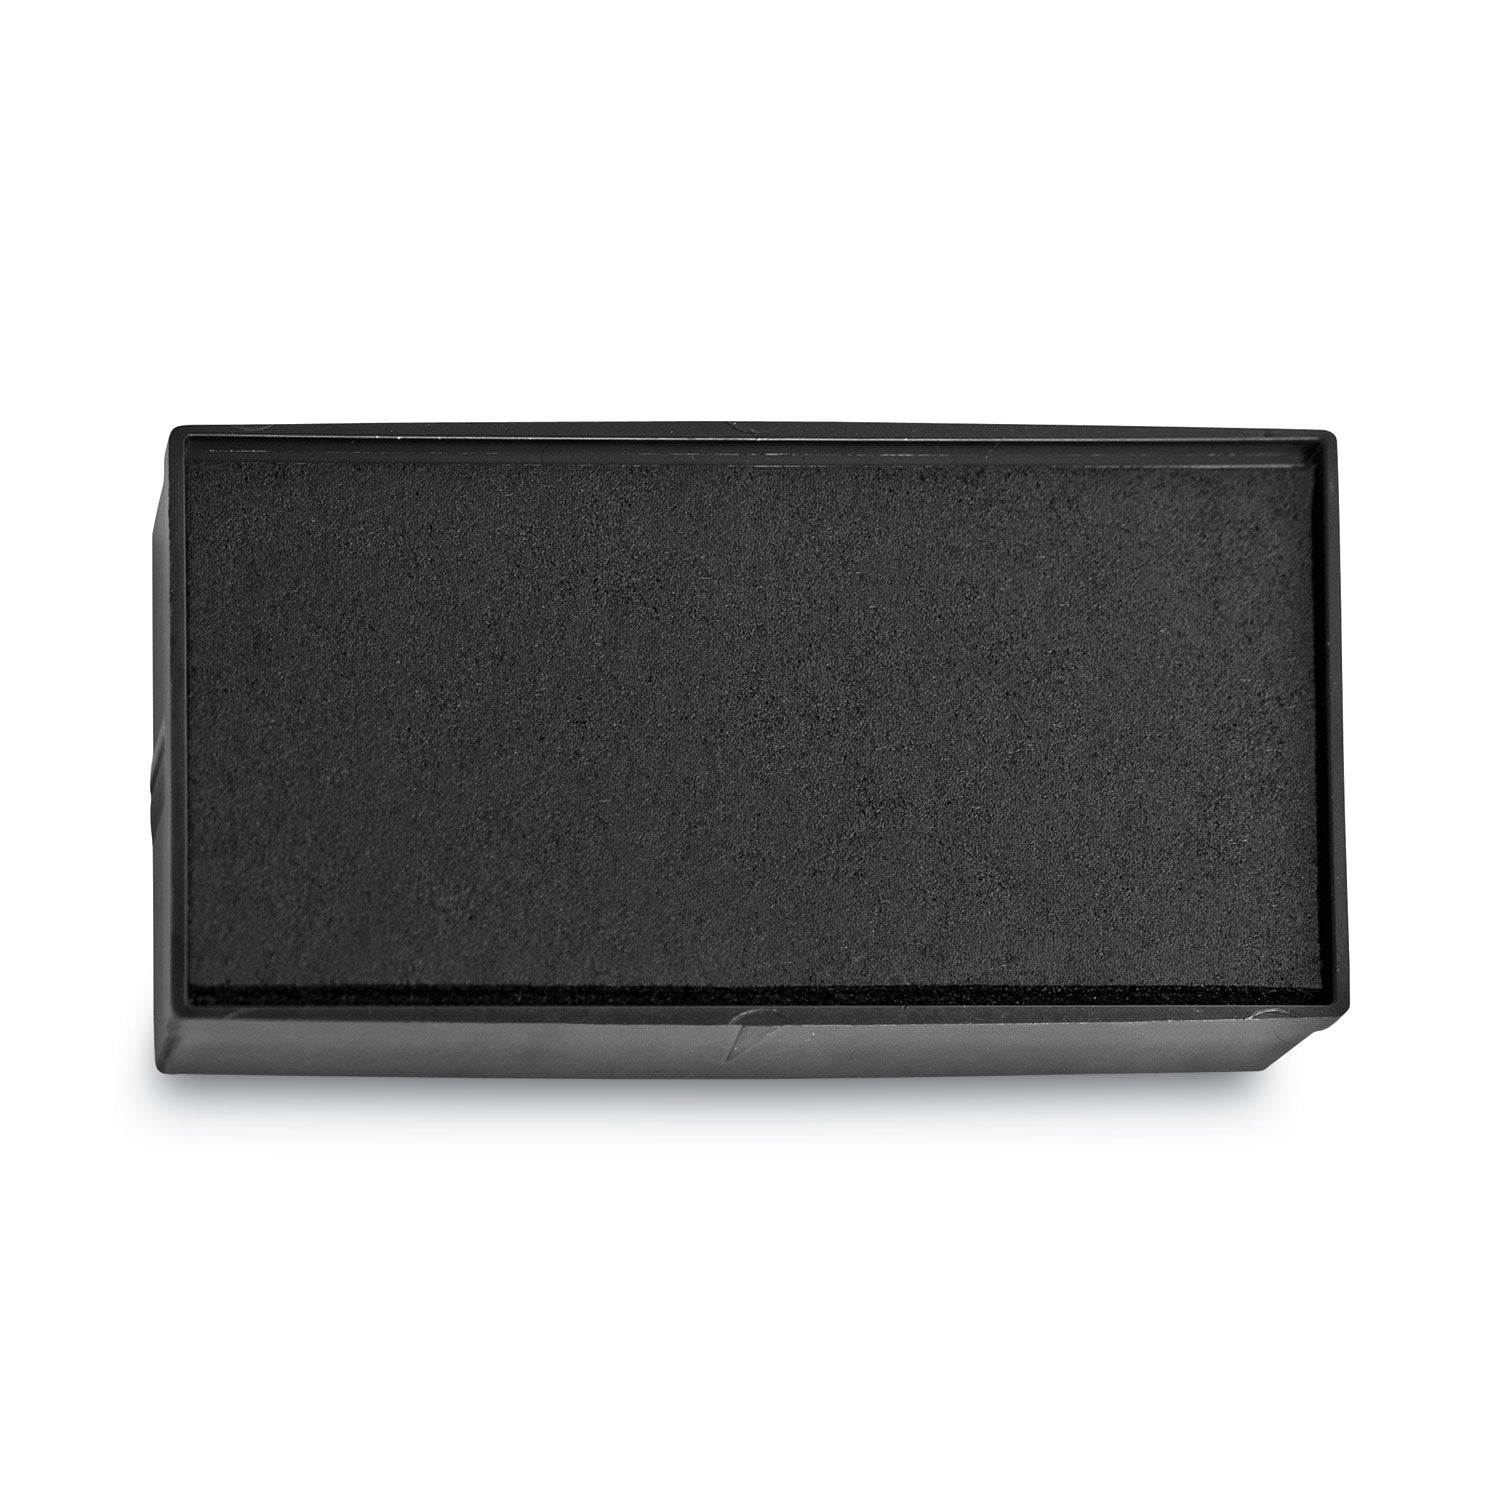 Replacement Ink Pad for 2000PLUS 1SI30PGL, 1.94" x 0.25", Black - 